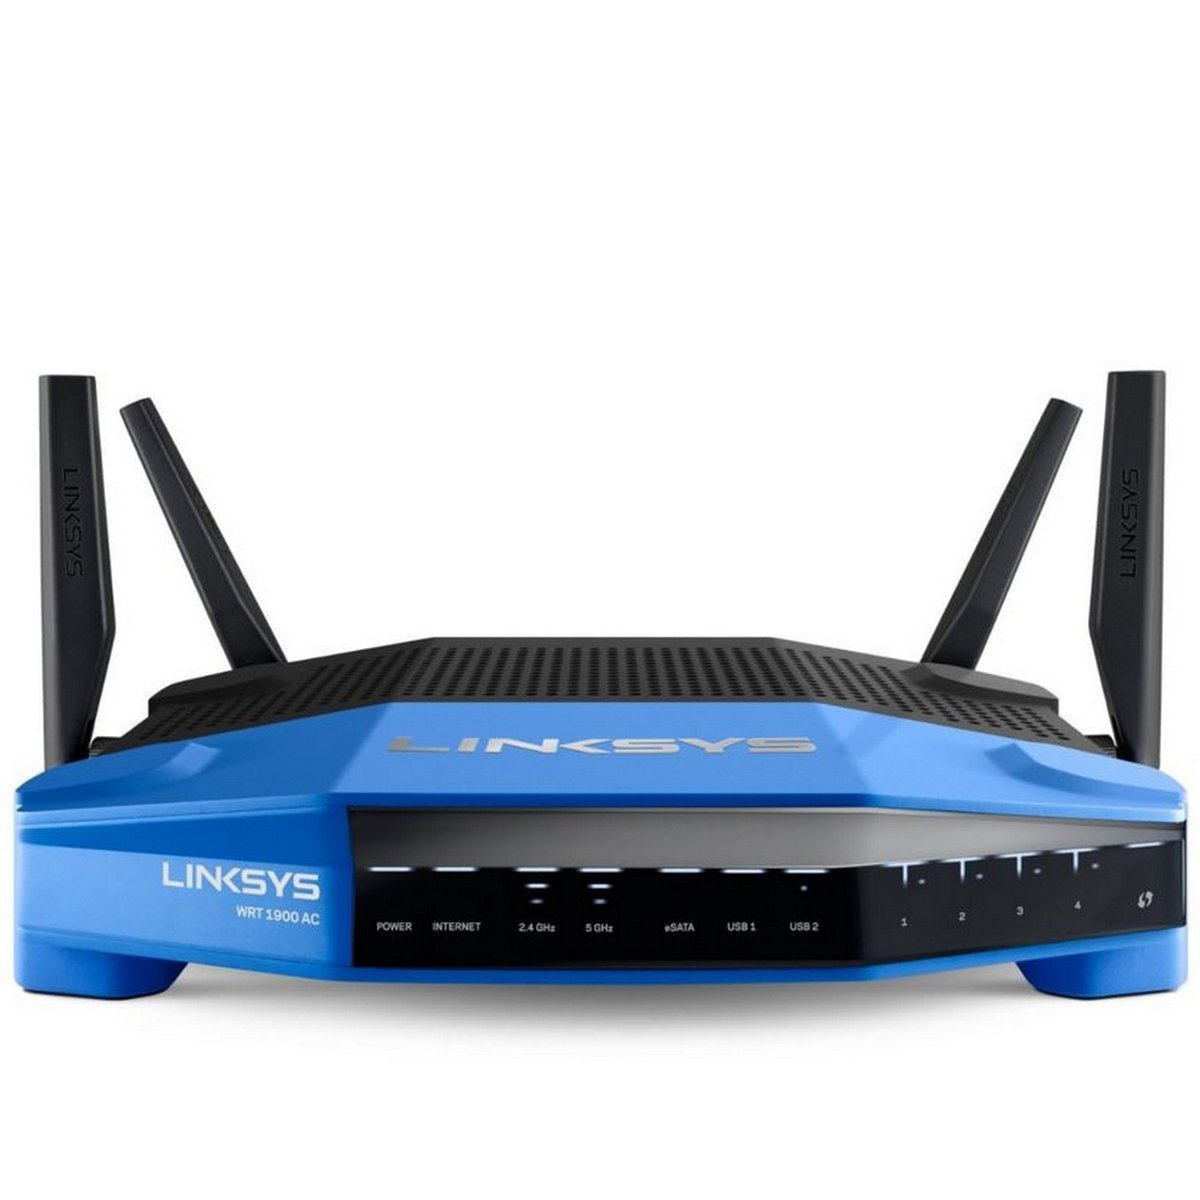 Linksys WRT1900AC Wireless AC Dual Band Smart Router - Store 974 | ستور ٩٧٤